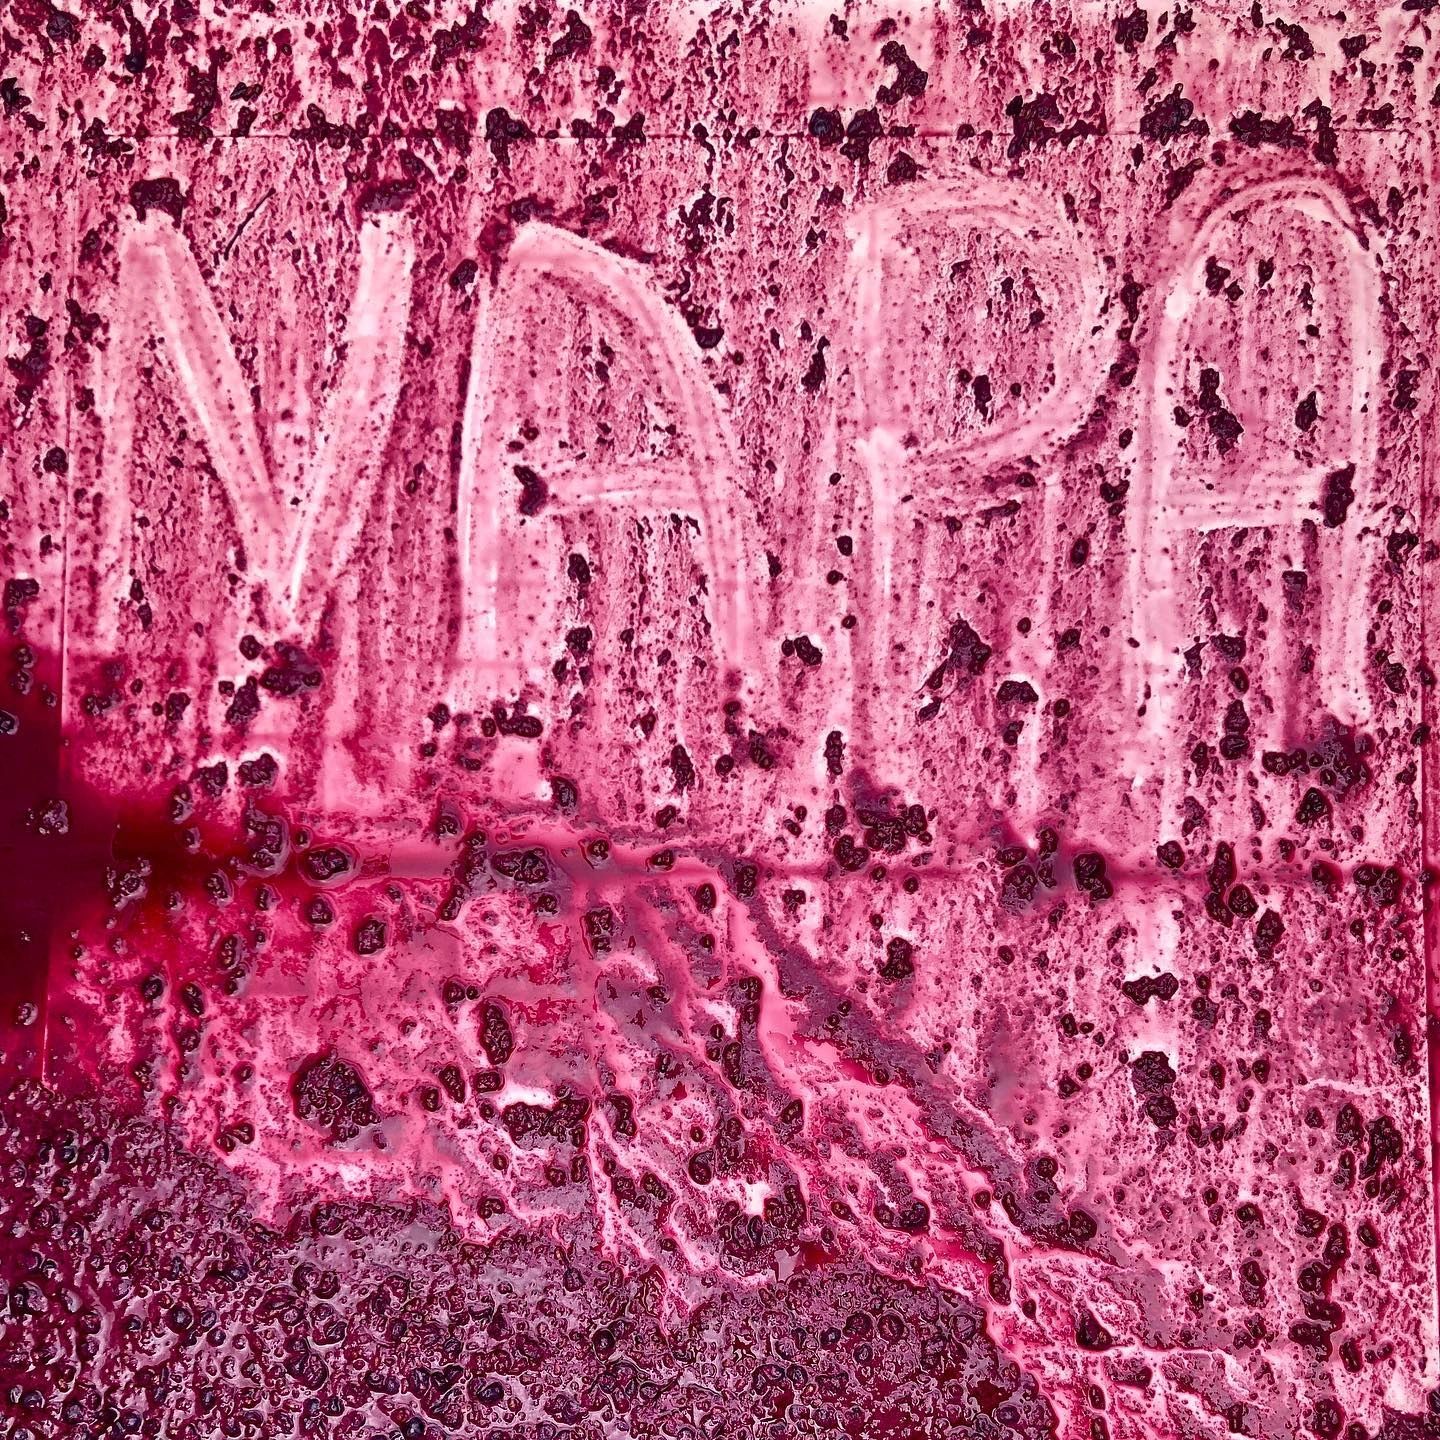 The bottom of a macro bin covered with the remnants of cabernet that had just been fermented in Napa